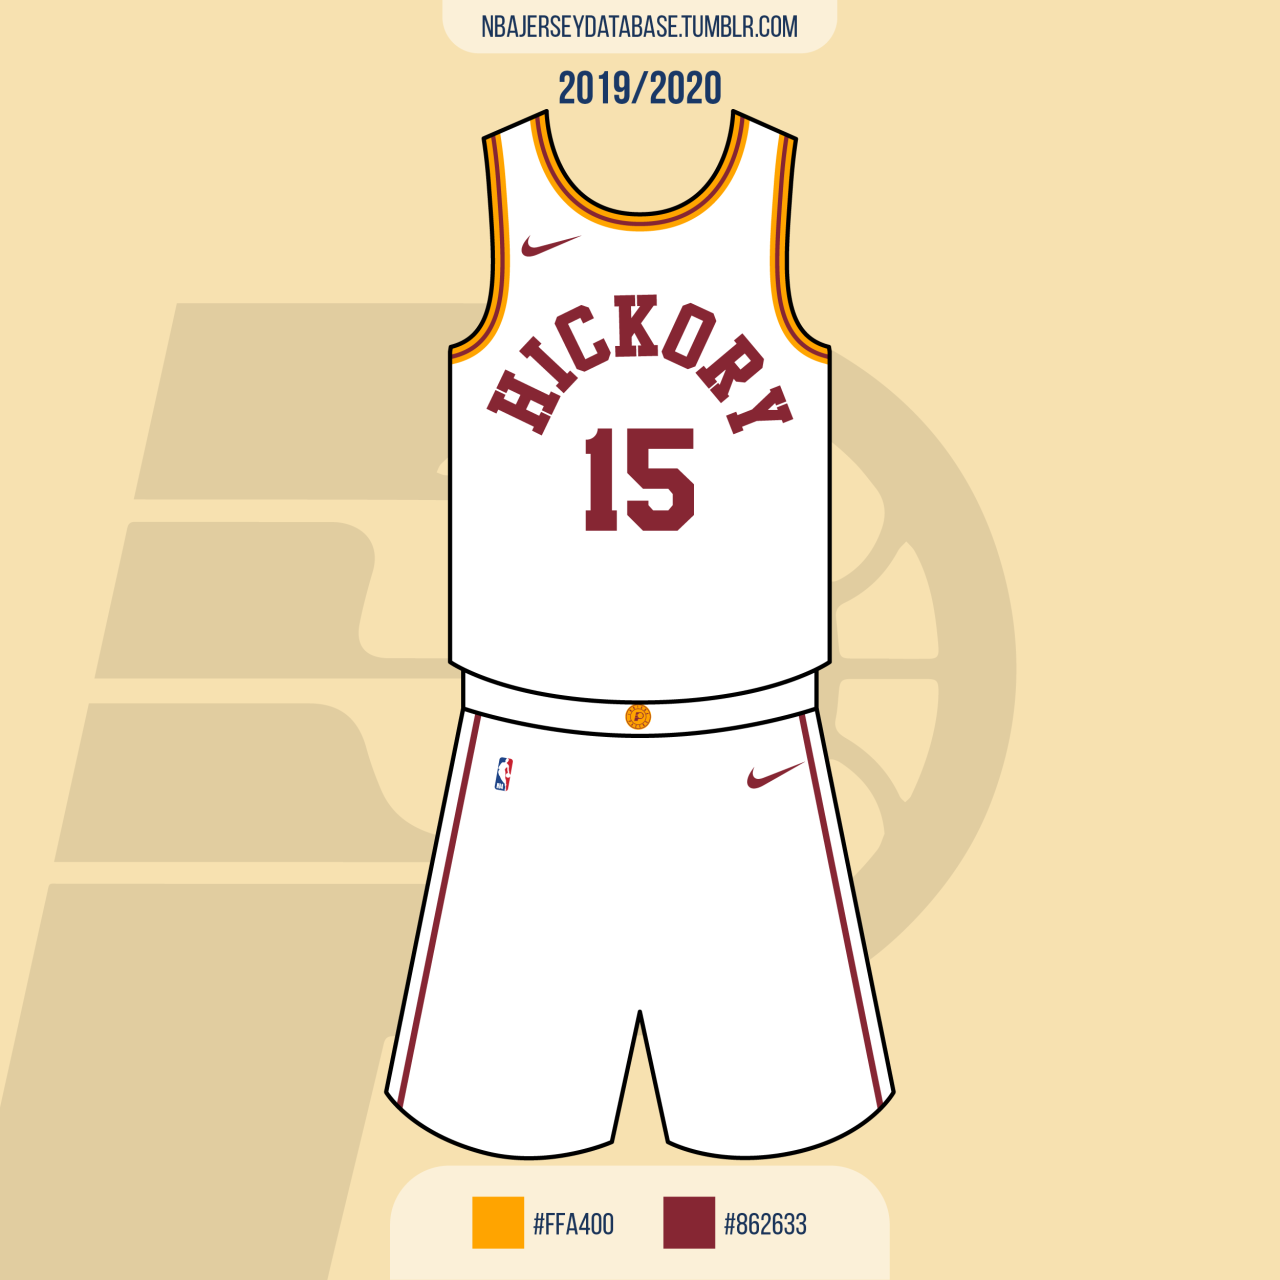 NBA Jersey Database, Indiana Pacers City Jersey 2019-2020